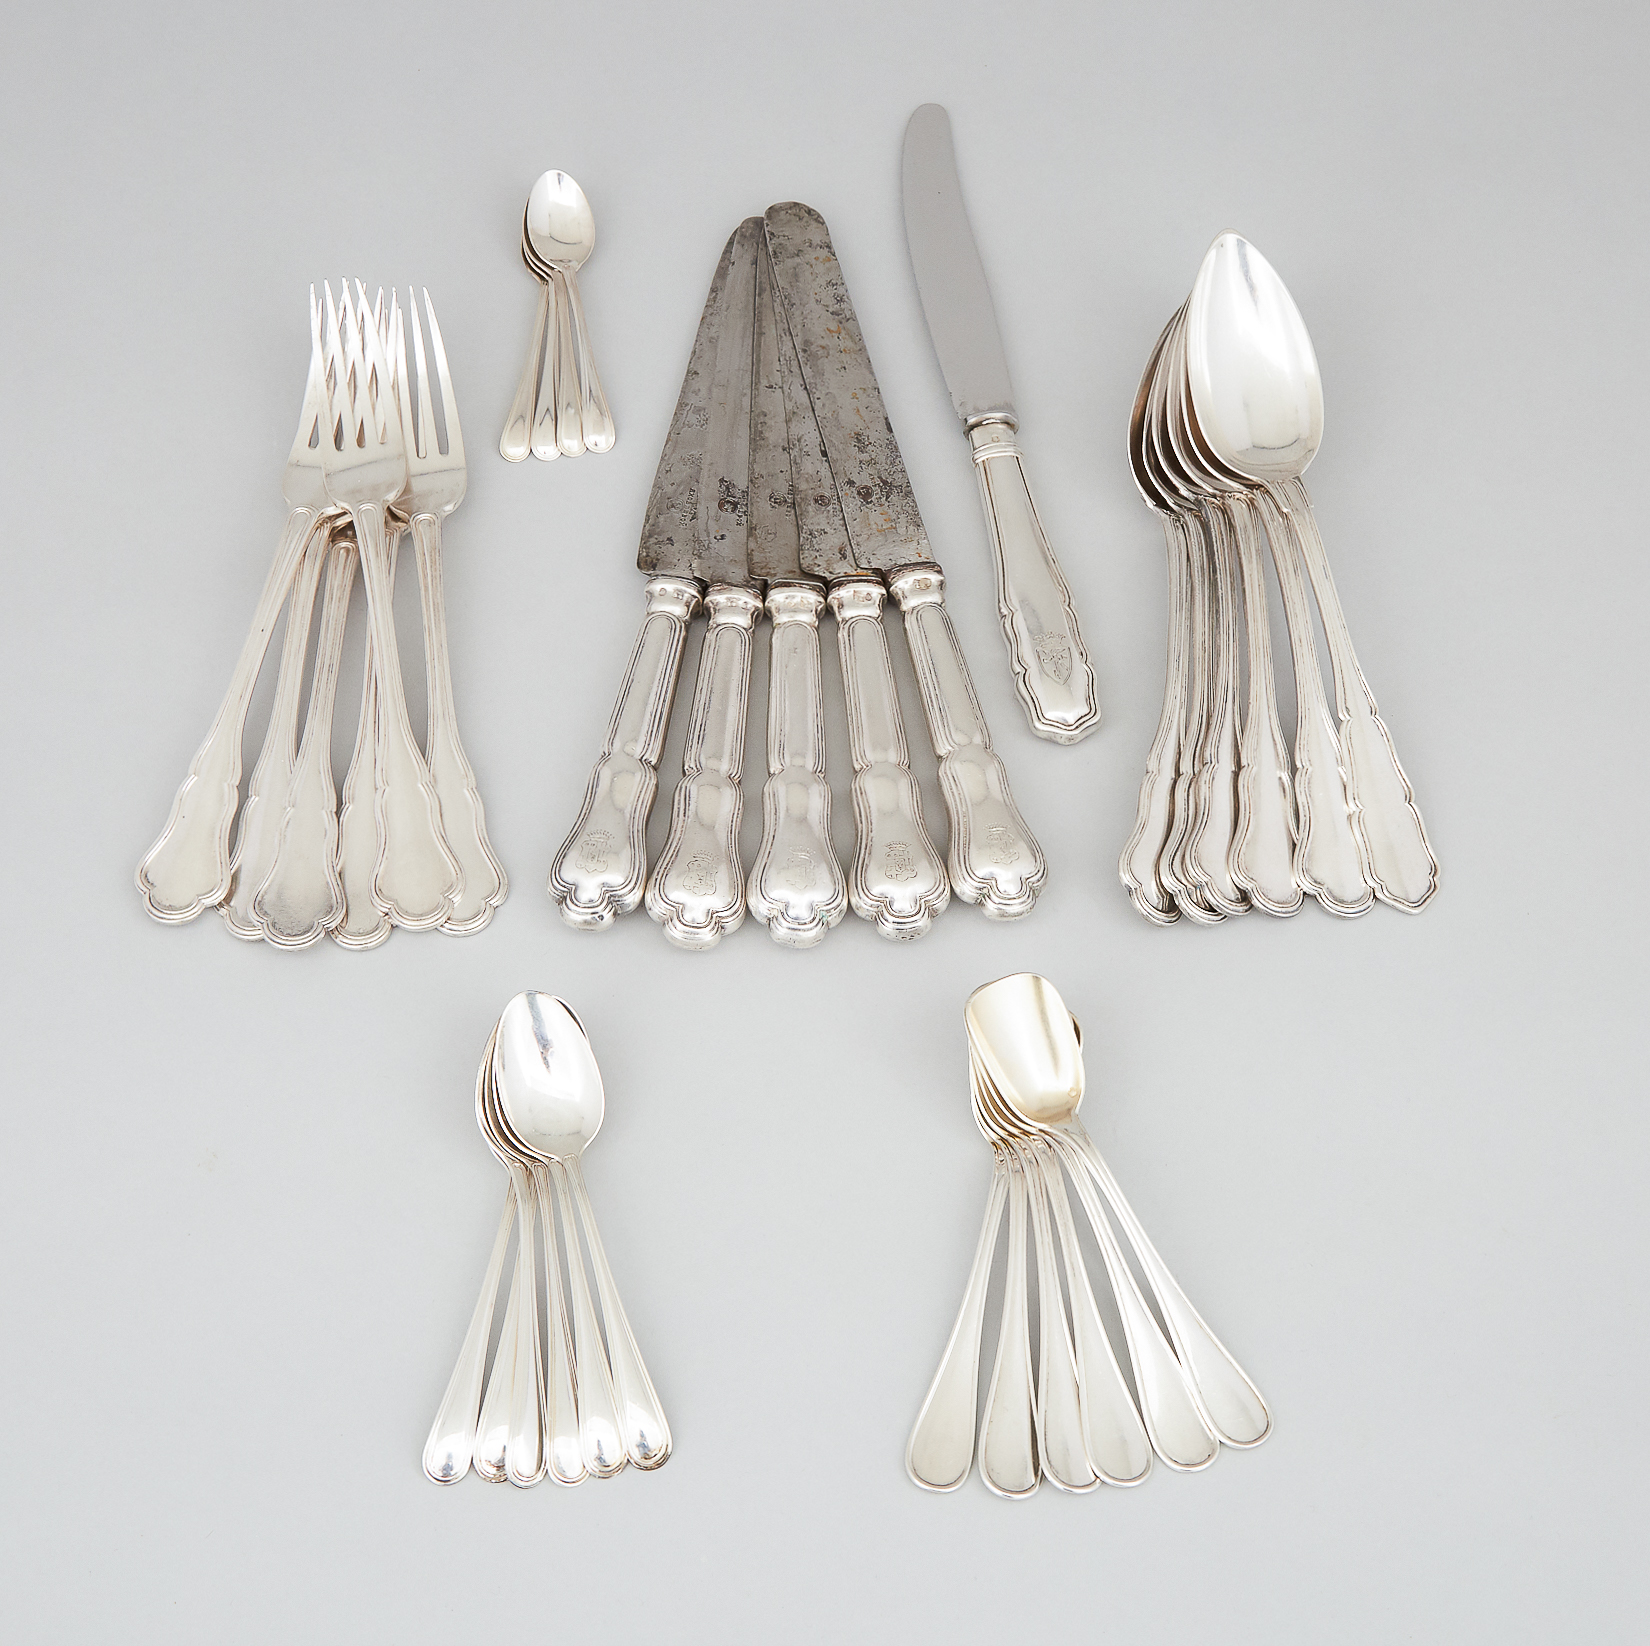 Group of Russian, Austro-Hungarian and North American Silver Flatware, 19th/20th century